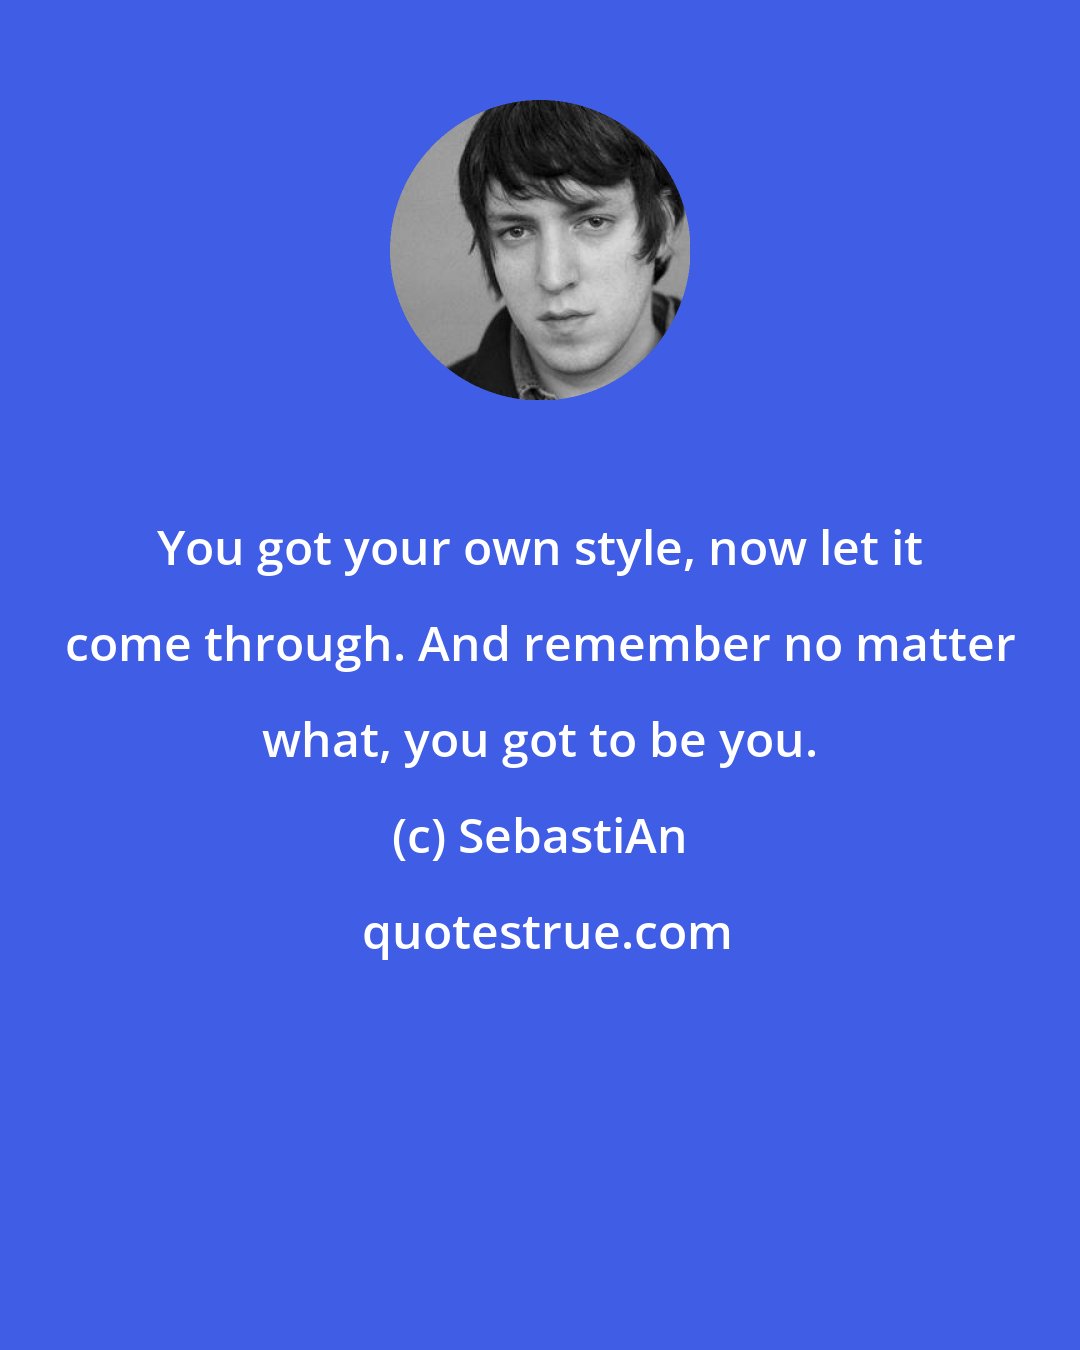 SebastiAn: You got your own style, now let it come through. And remember no matter what, you got to be you.